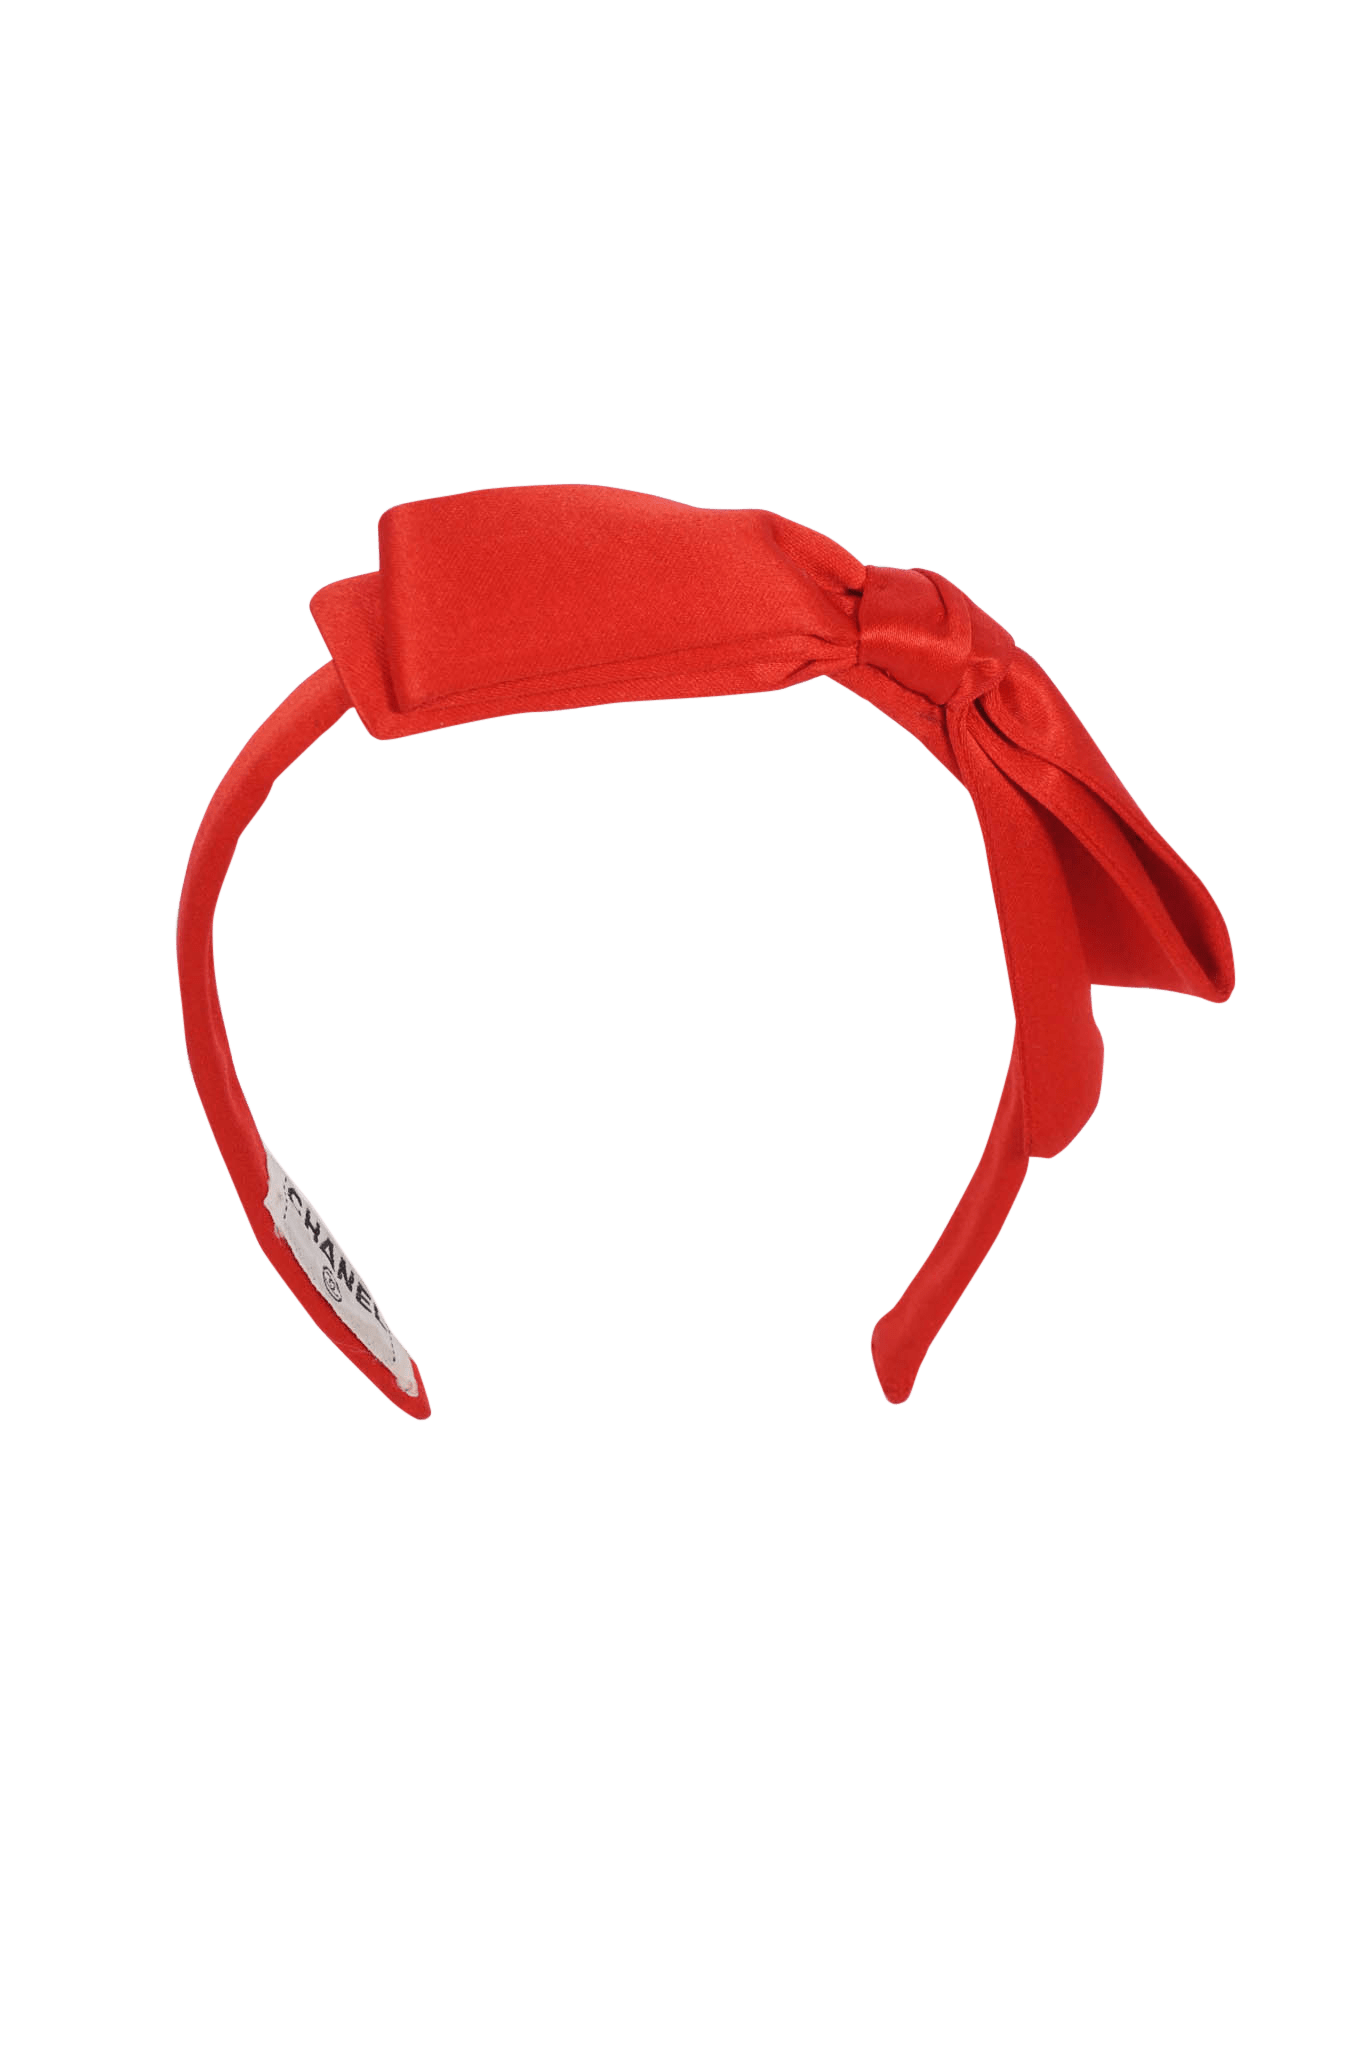 Chanel Vintage Red Satin Bow Headband 1990 - Foxy Couture Carmel